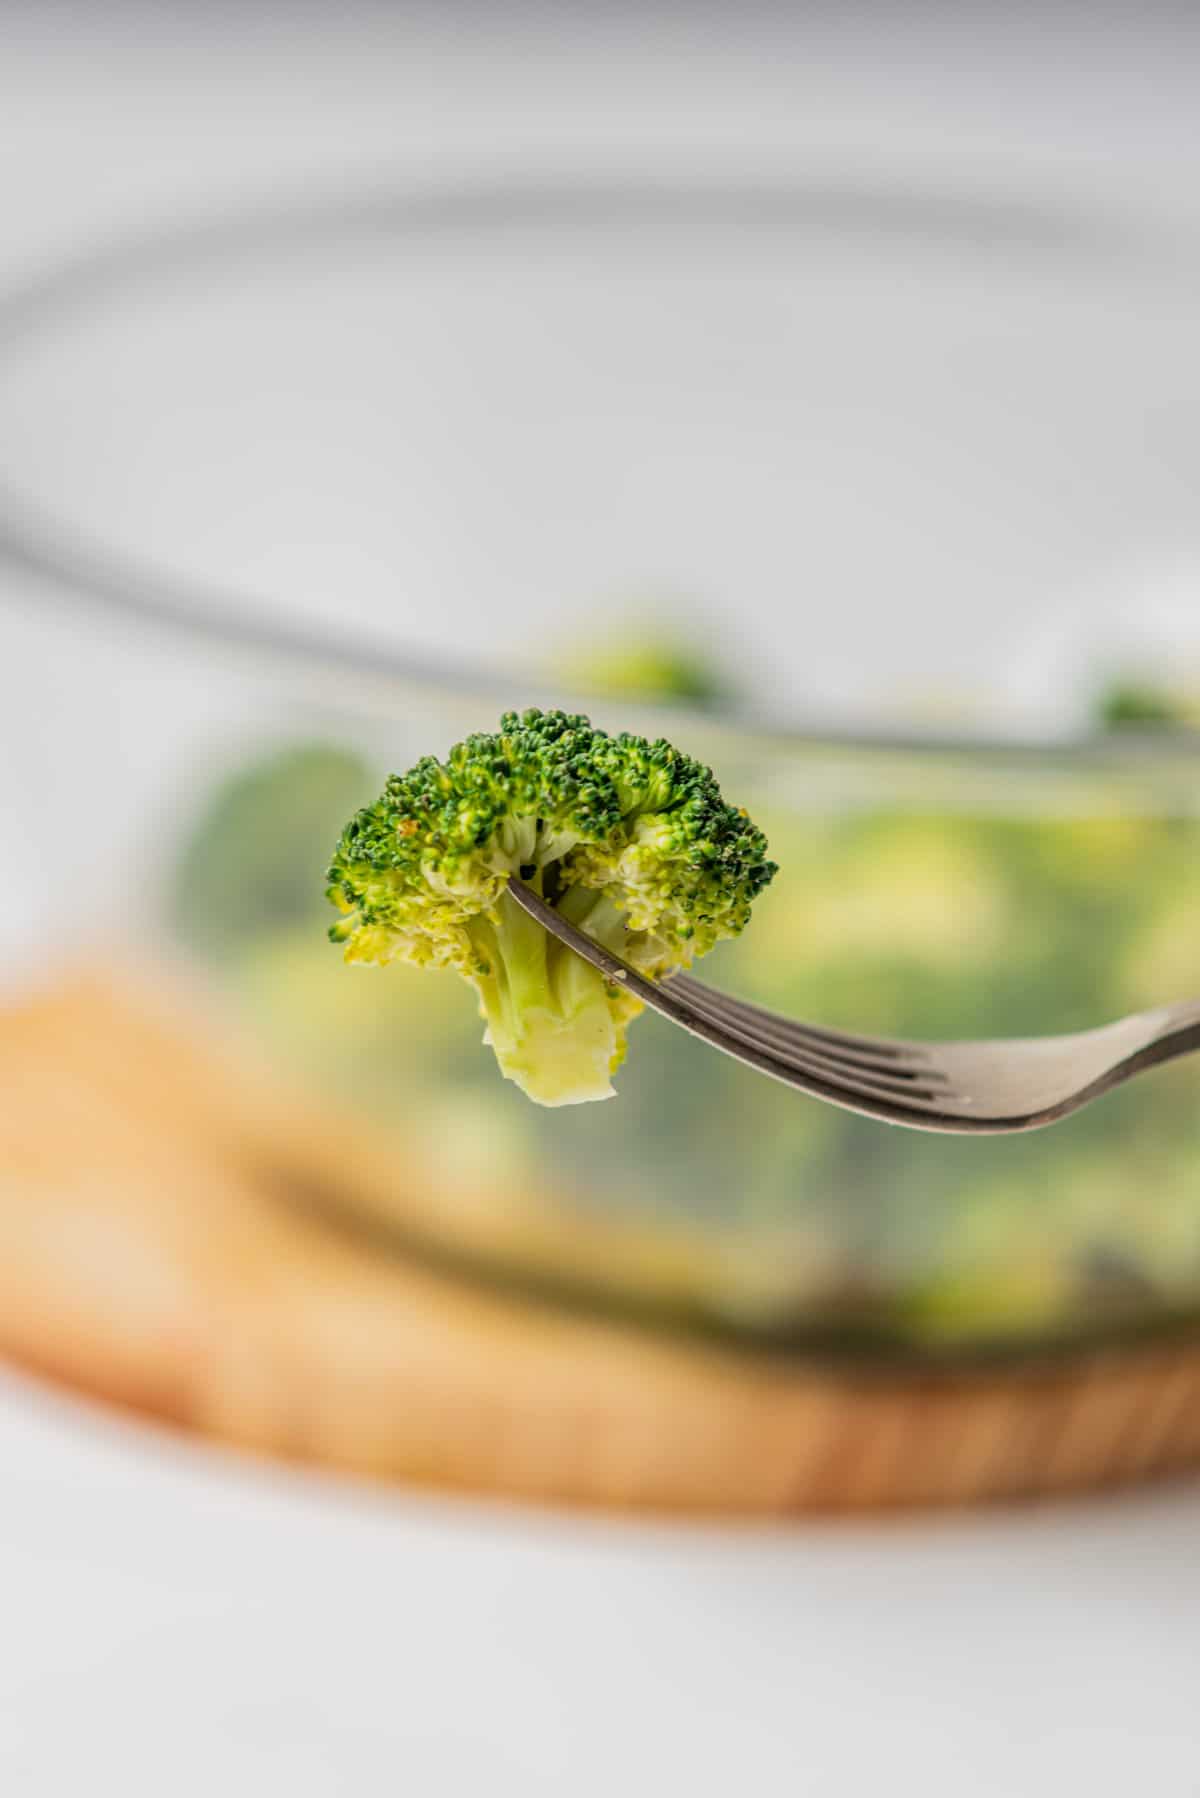 A close up image of a broccoli pierced by a fork